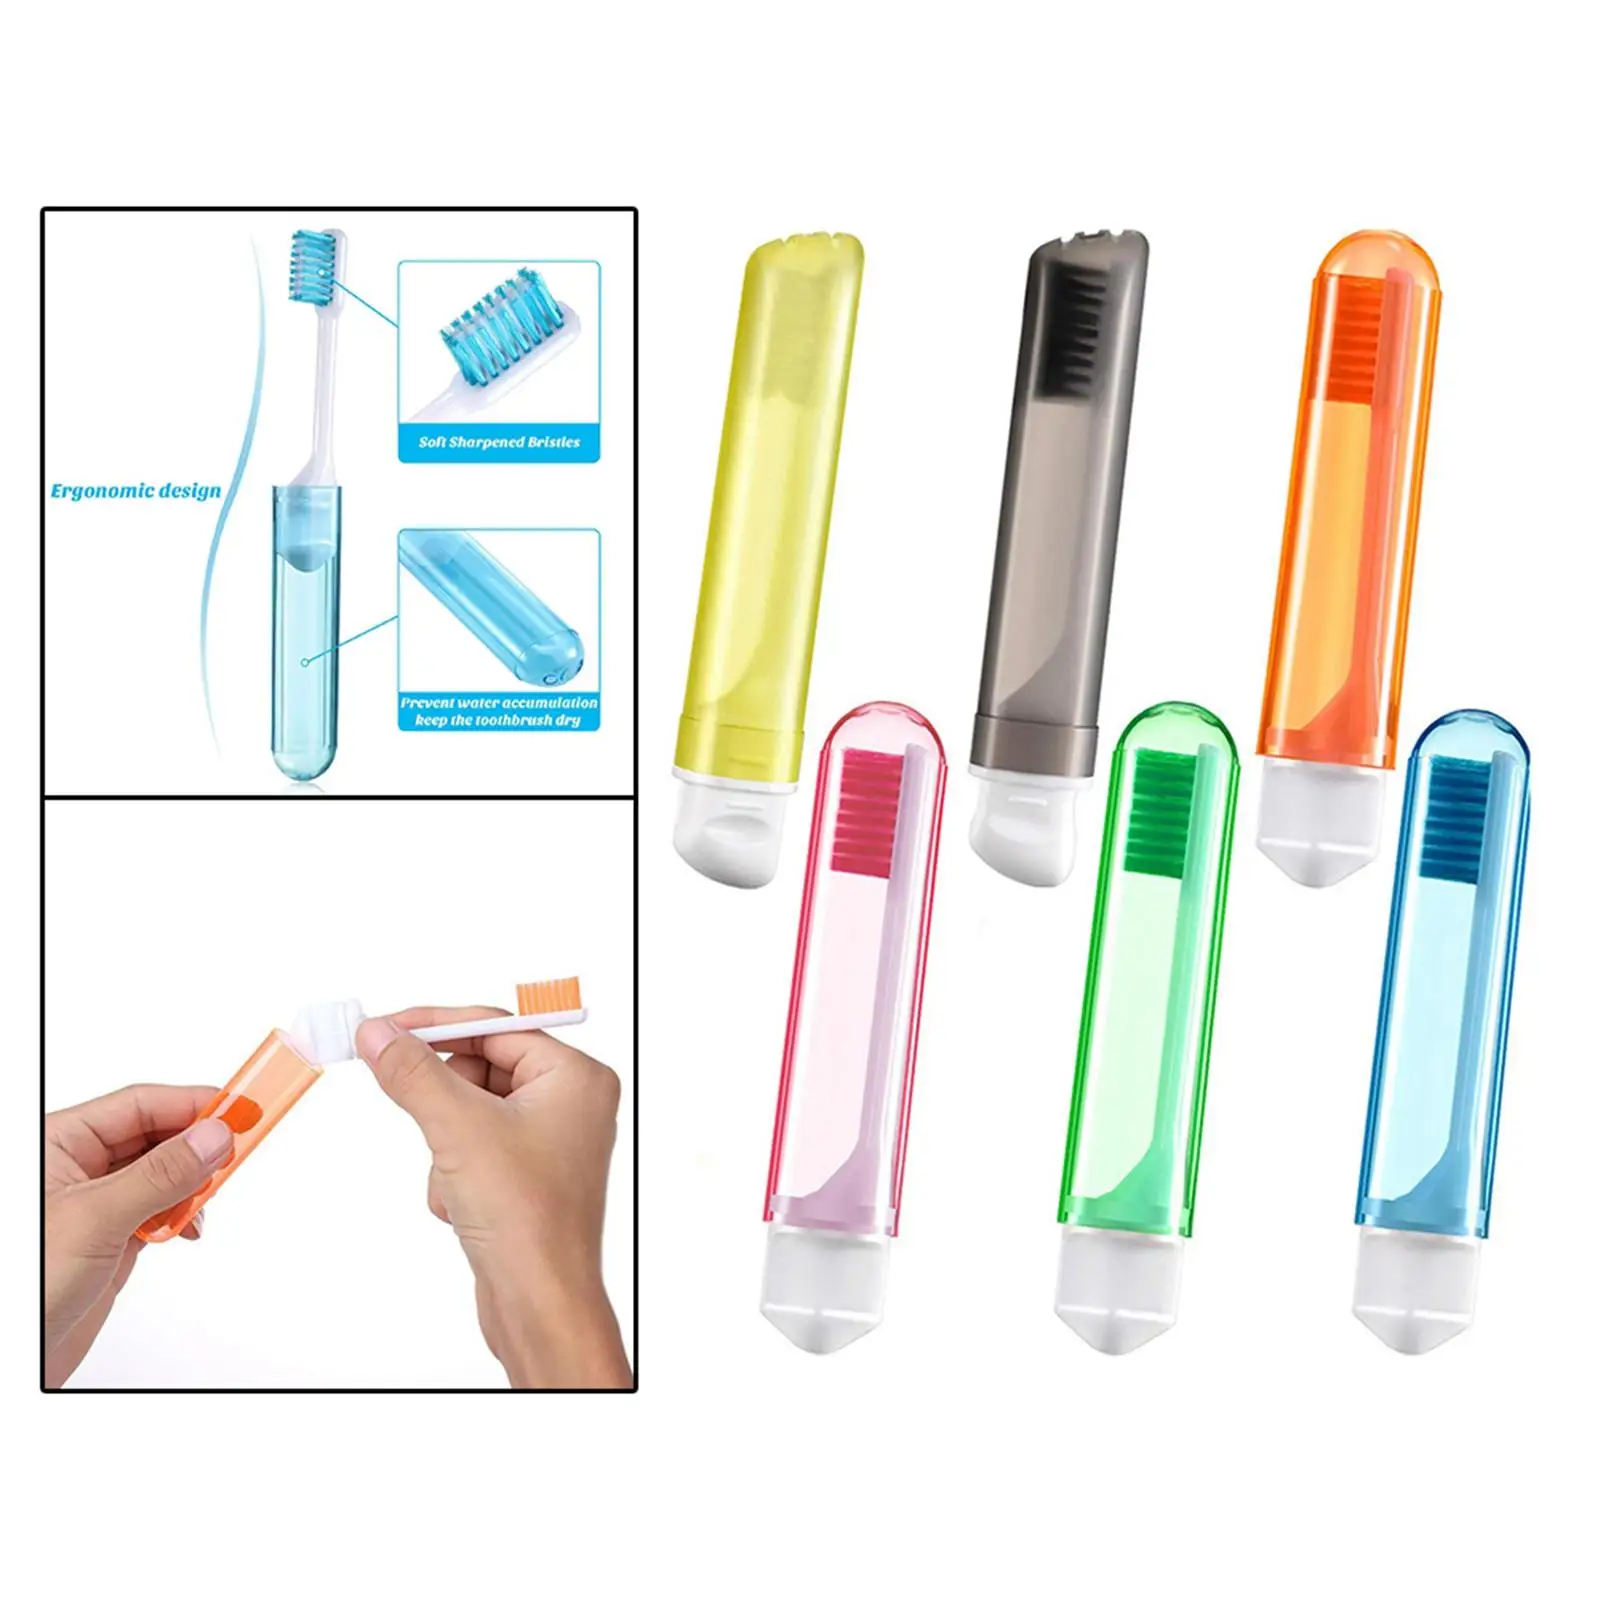 6 Colors Portable Folding Toothbrush Easy to Take Toothbrush Pocket Size with Case Travel Toothbrush for Camping Travel Girl Boy